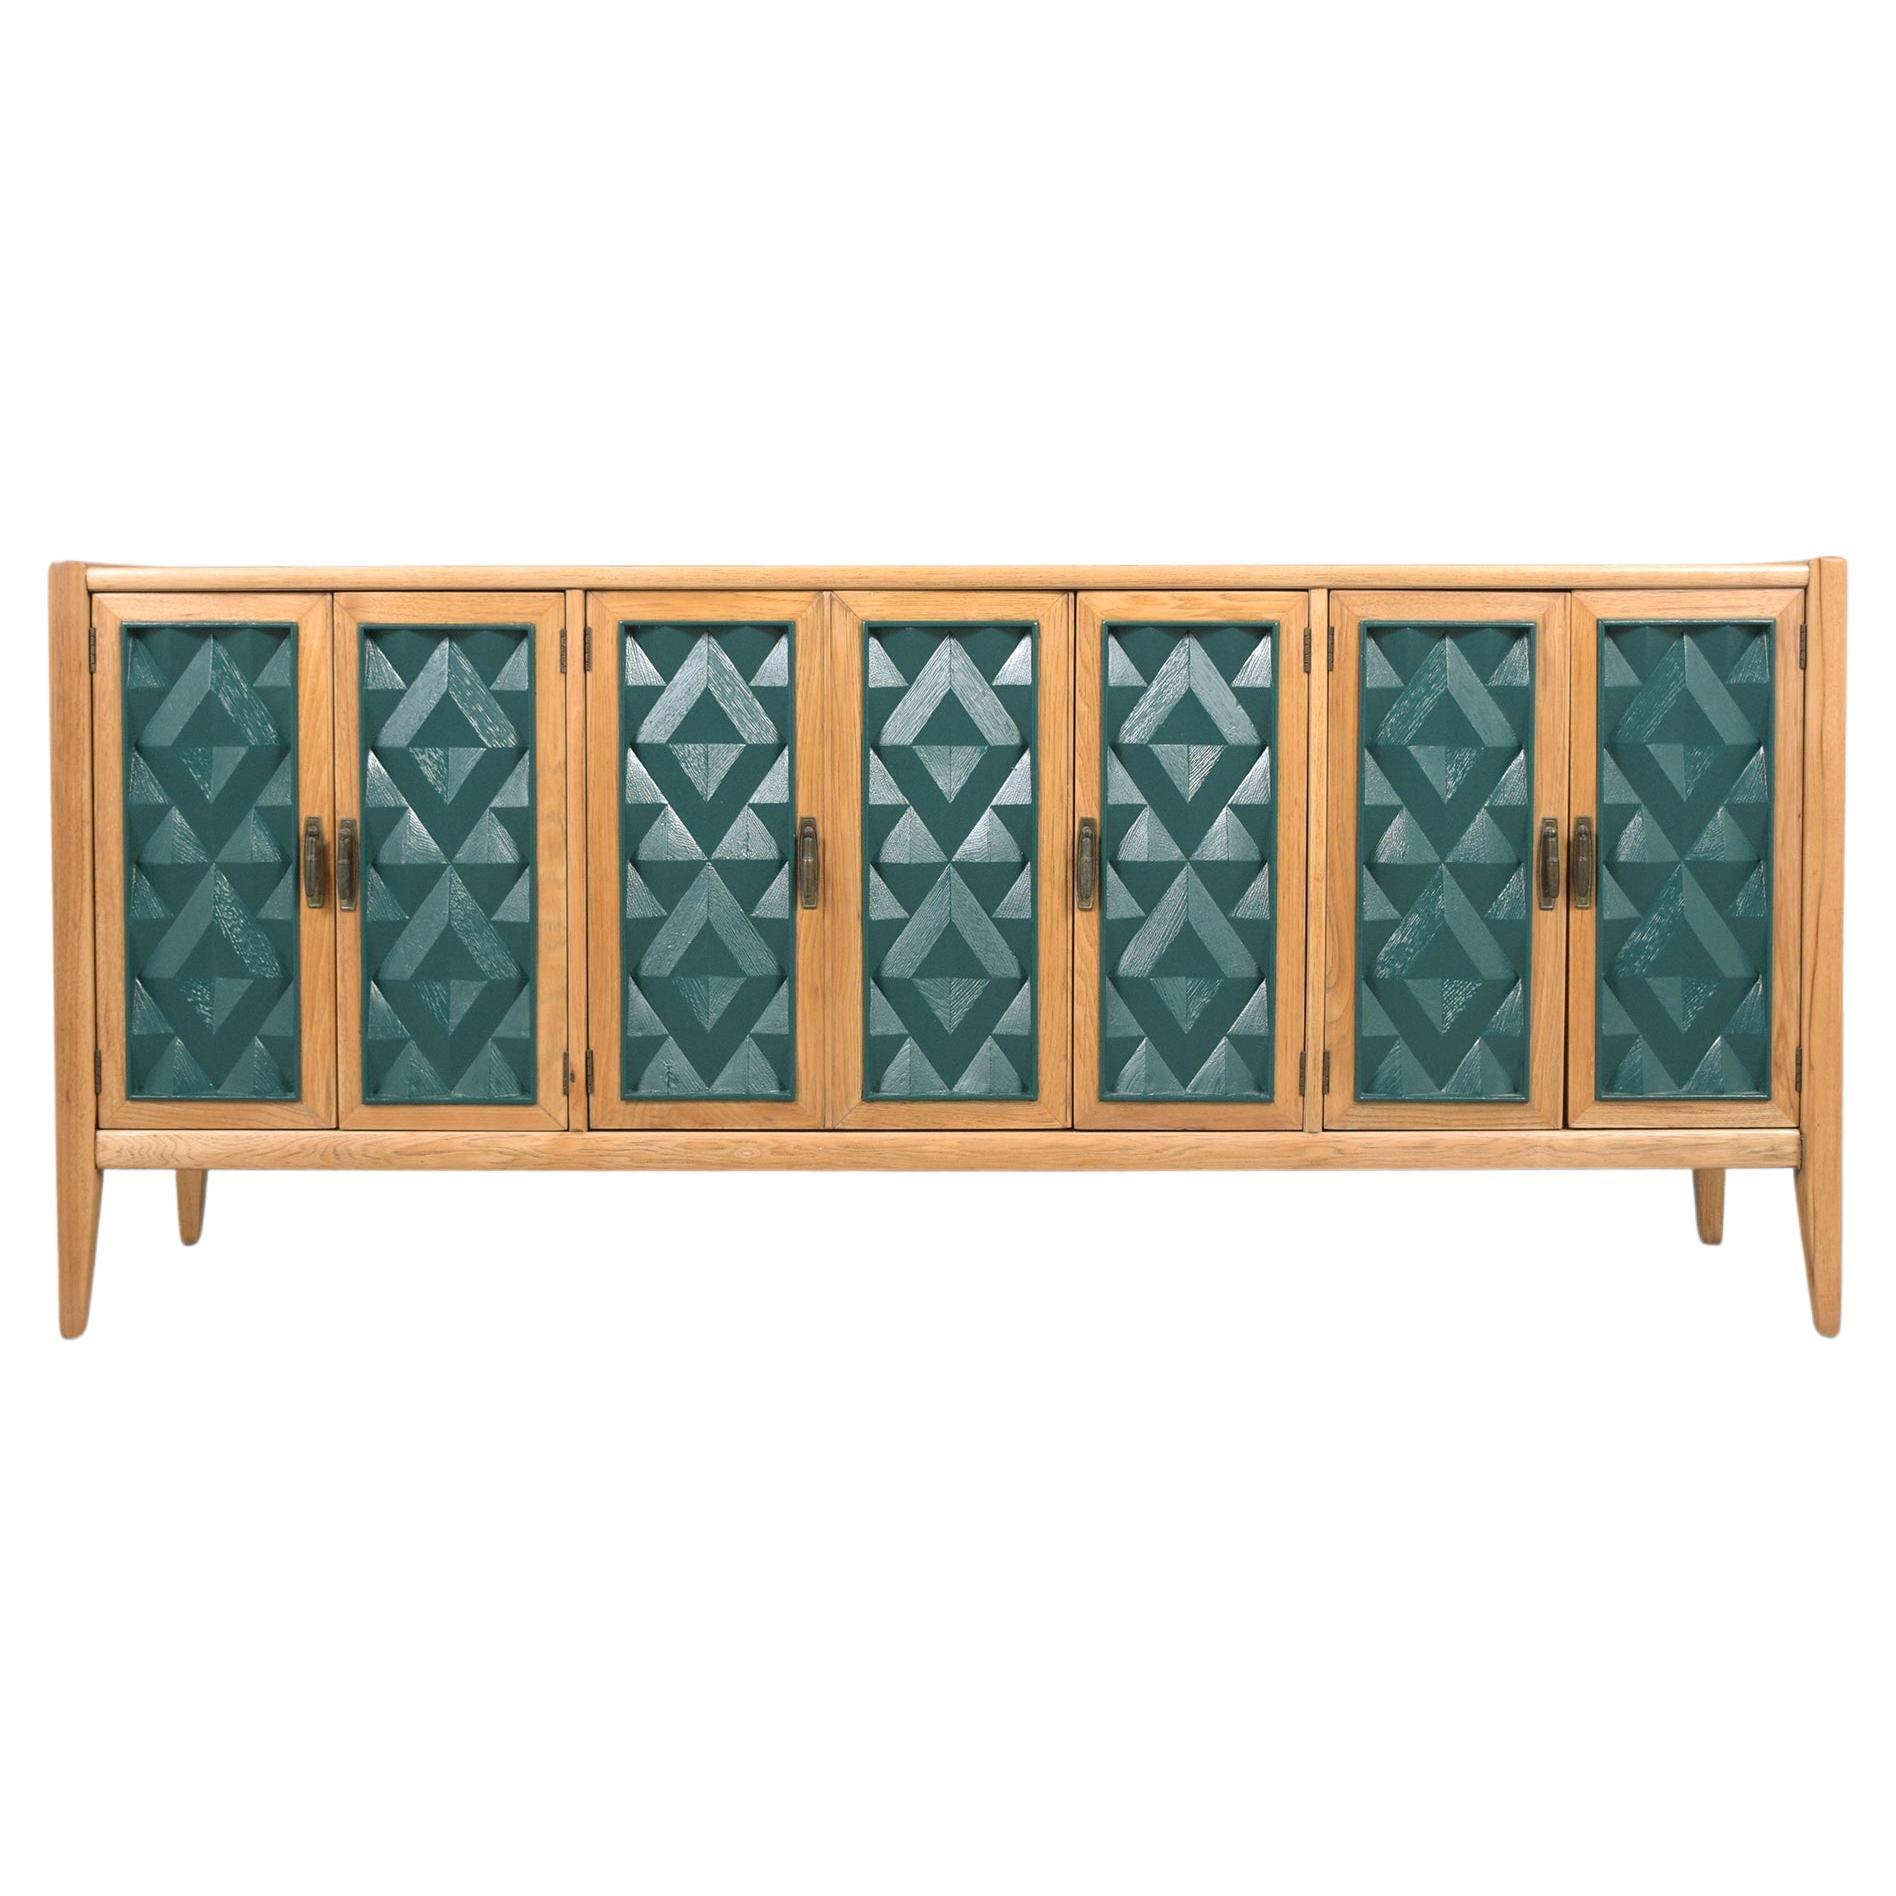 1960s Mid-Century Modern Green Diamond Panel Cabinet in Lacquered Walnut For Sale